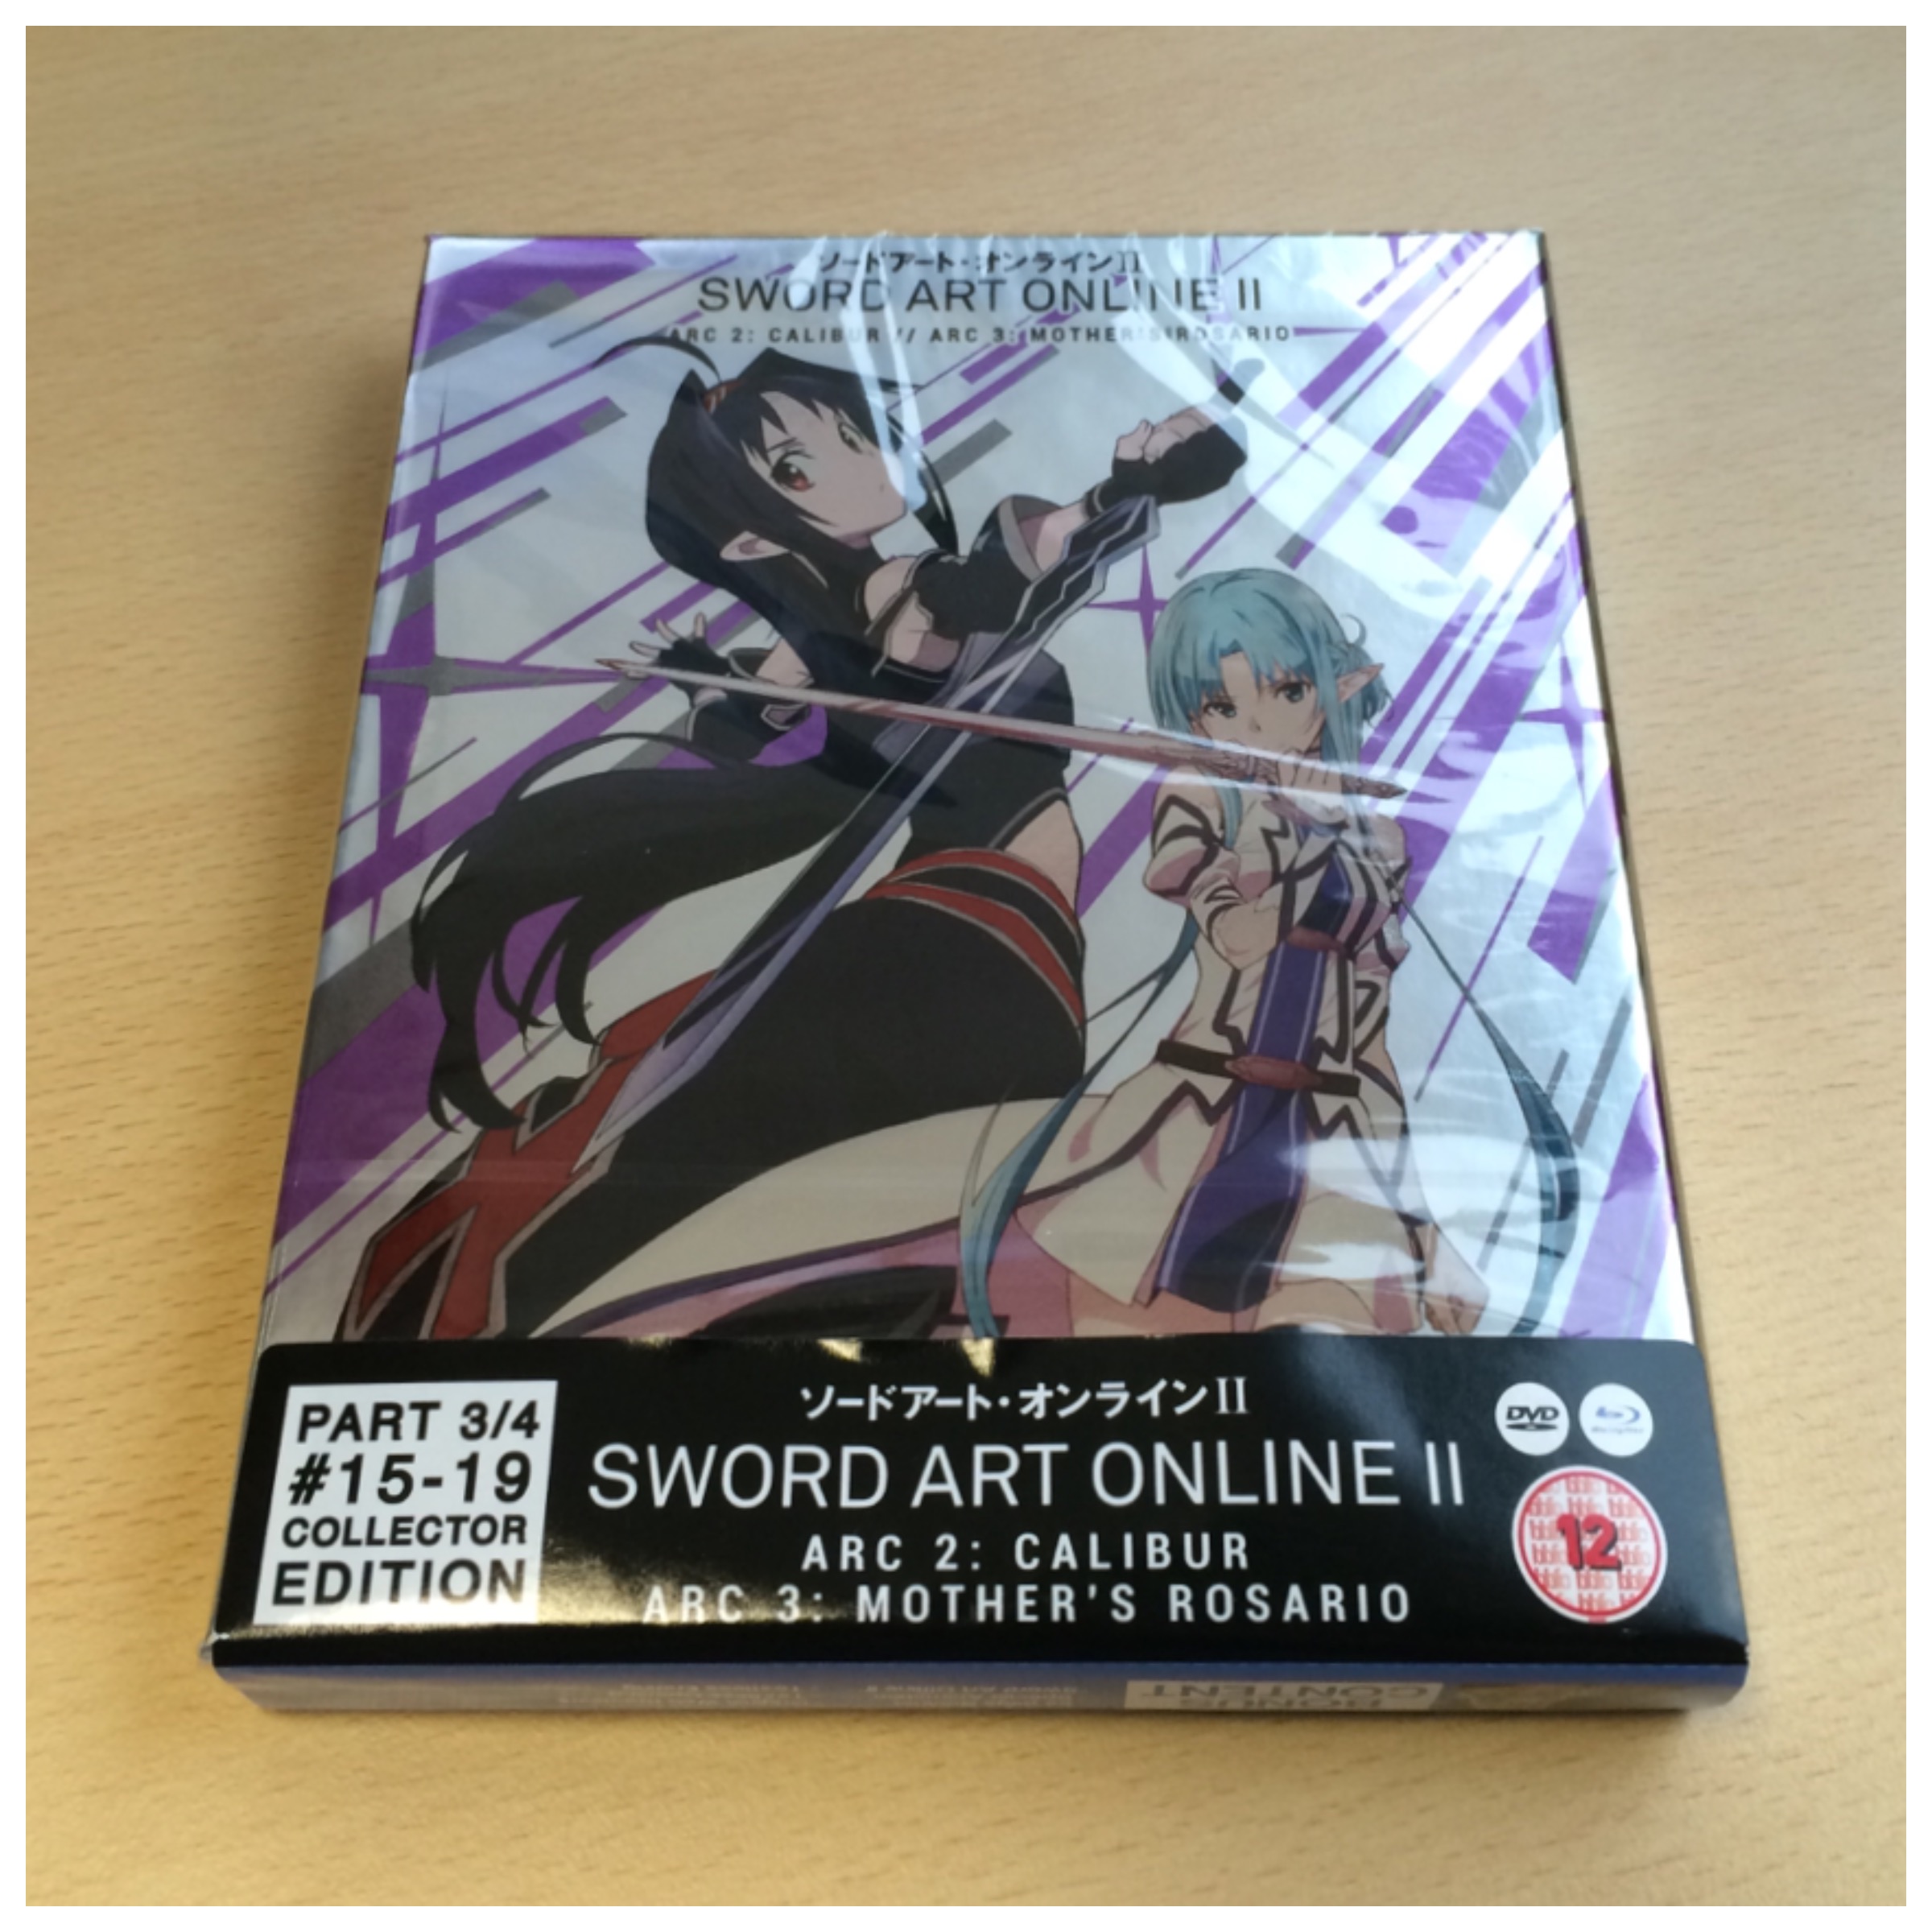 Unboxing] Sword Art Online II Part 3 – All the Anime